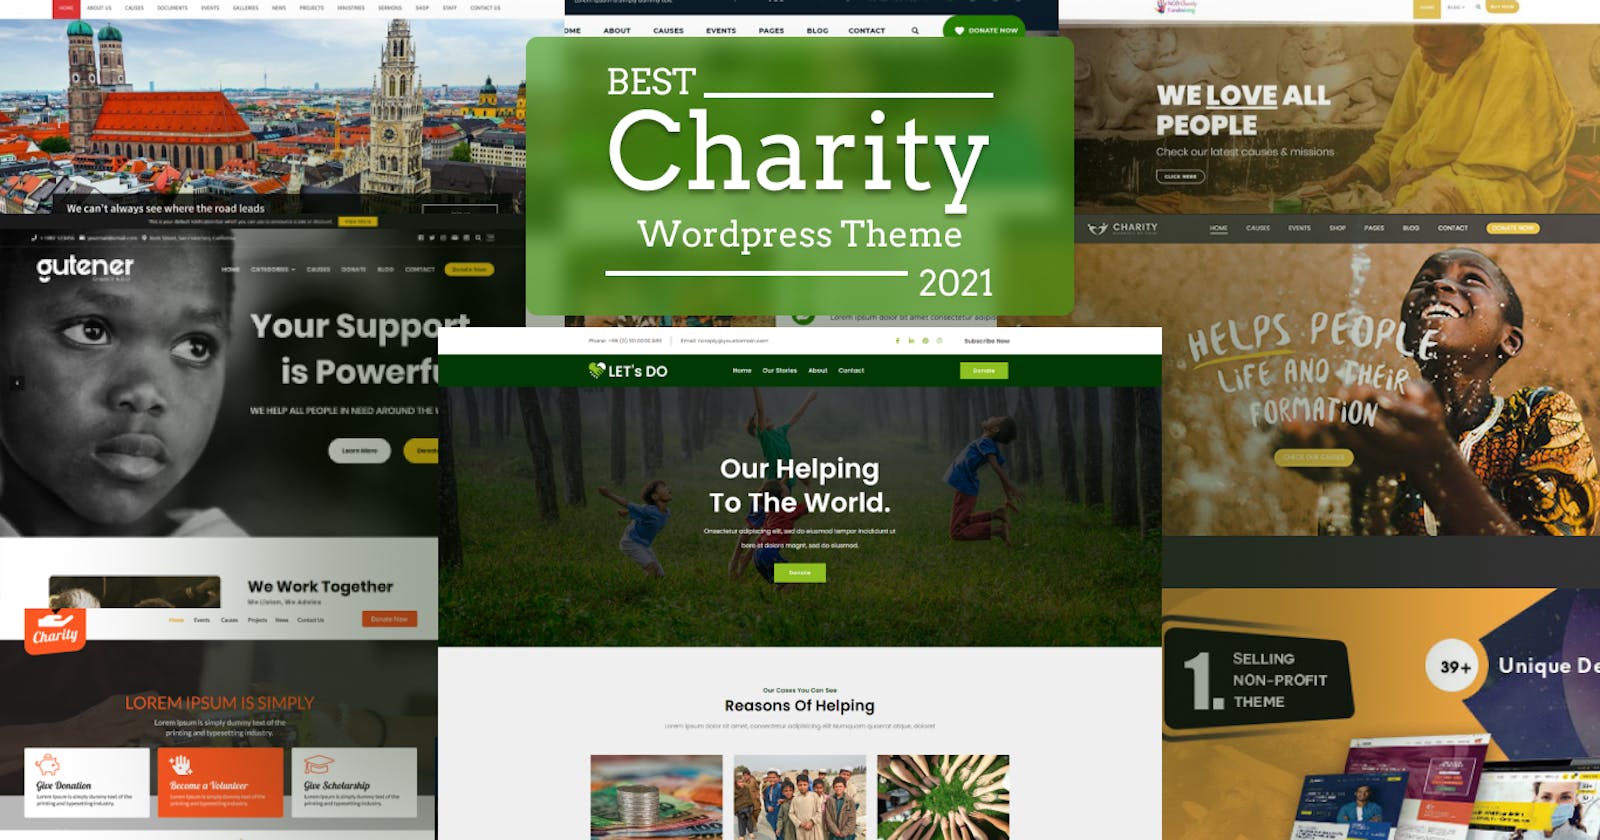 10 Best Charity WordPress Themes For Charity Websites